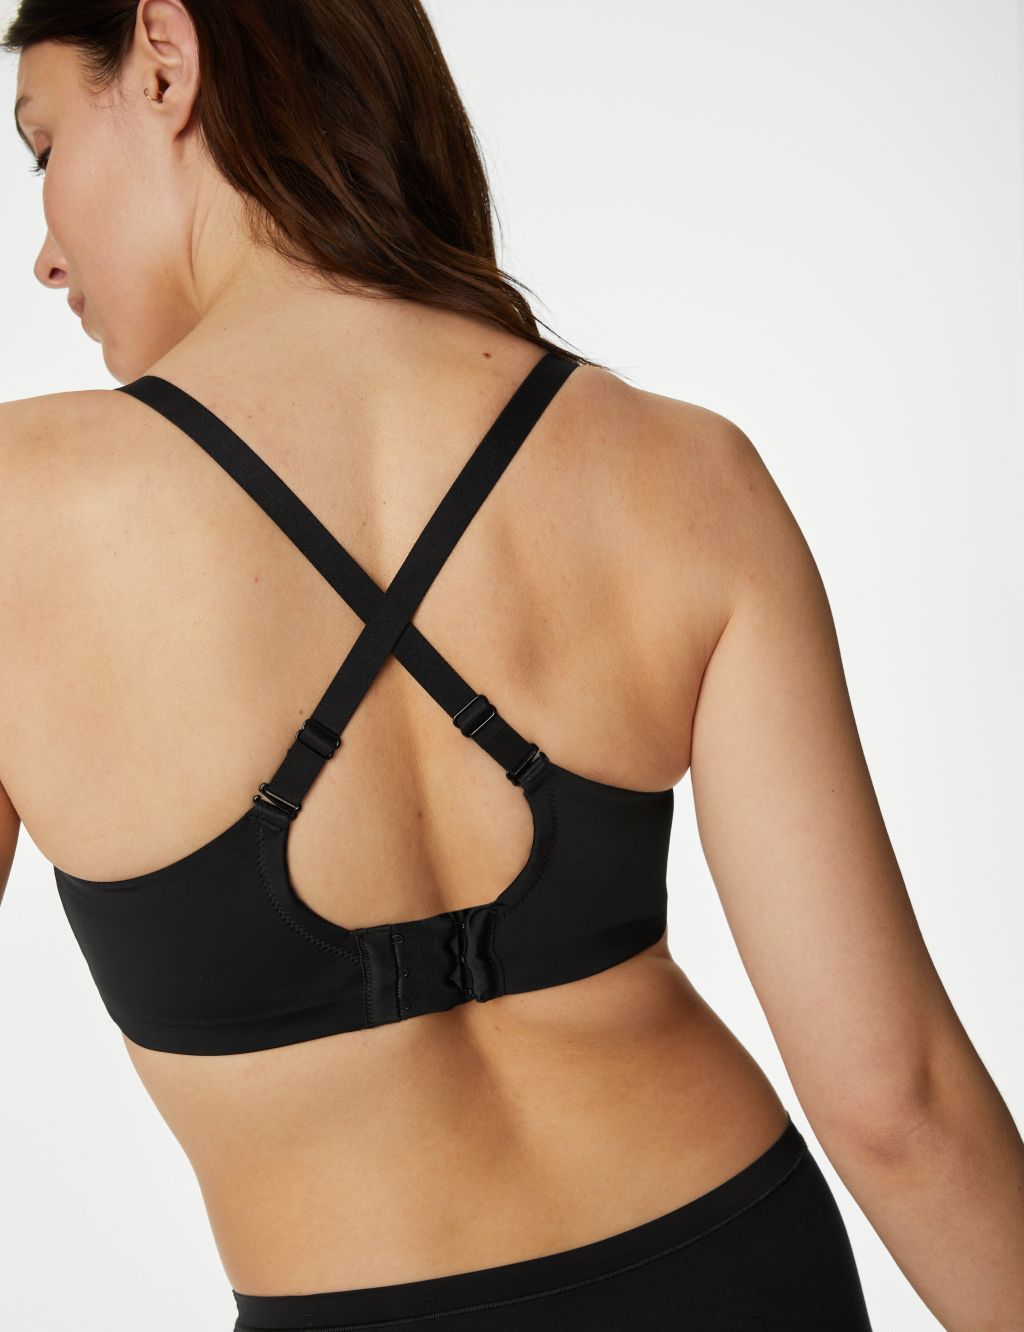 Flexifit™ Non-Wired Full Cup Bra F-H image 2